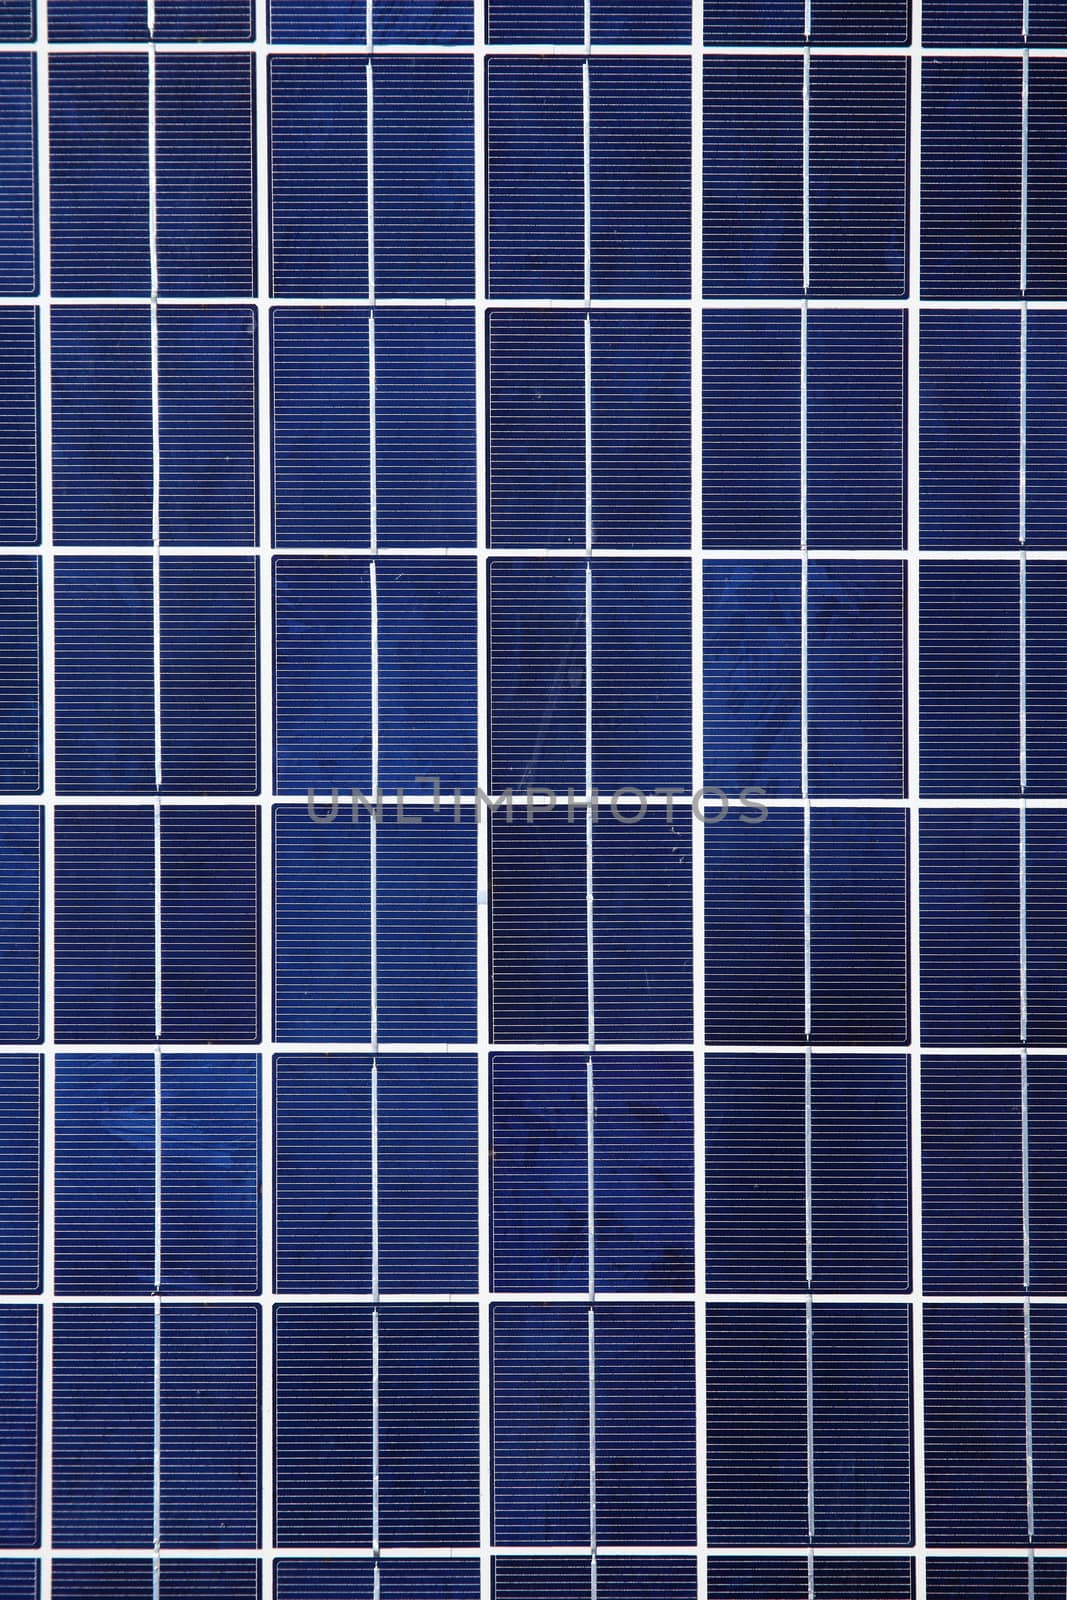 Solar panel alternative clean energy power used to end the use of  fossil fuels and to improve the environment by reducing global warming background stock image